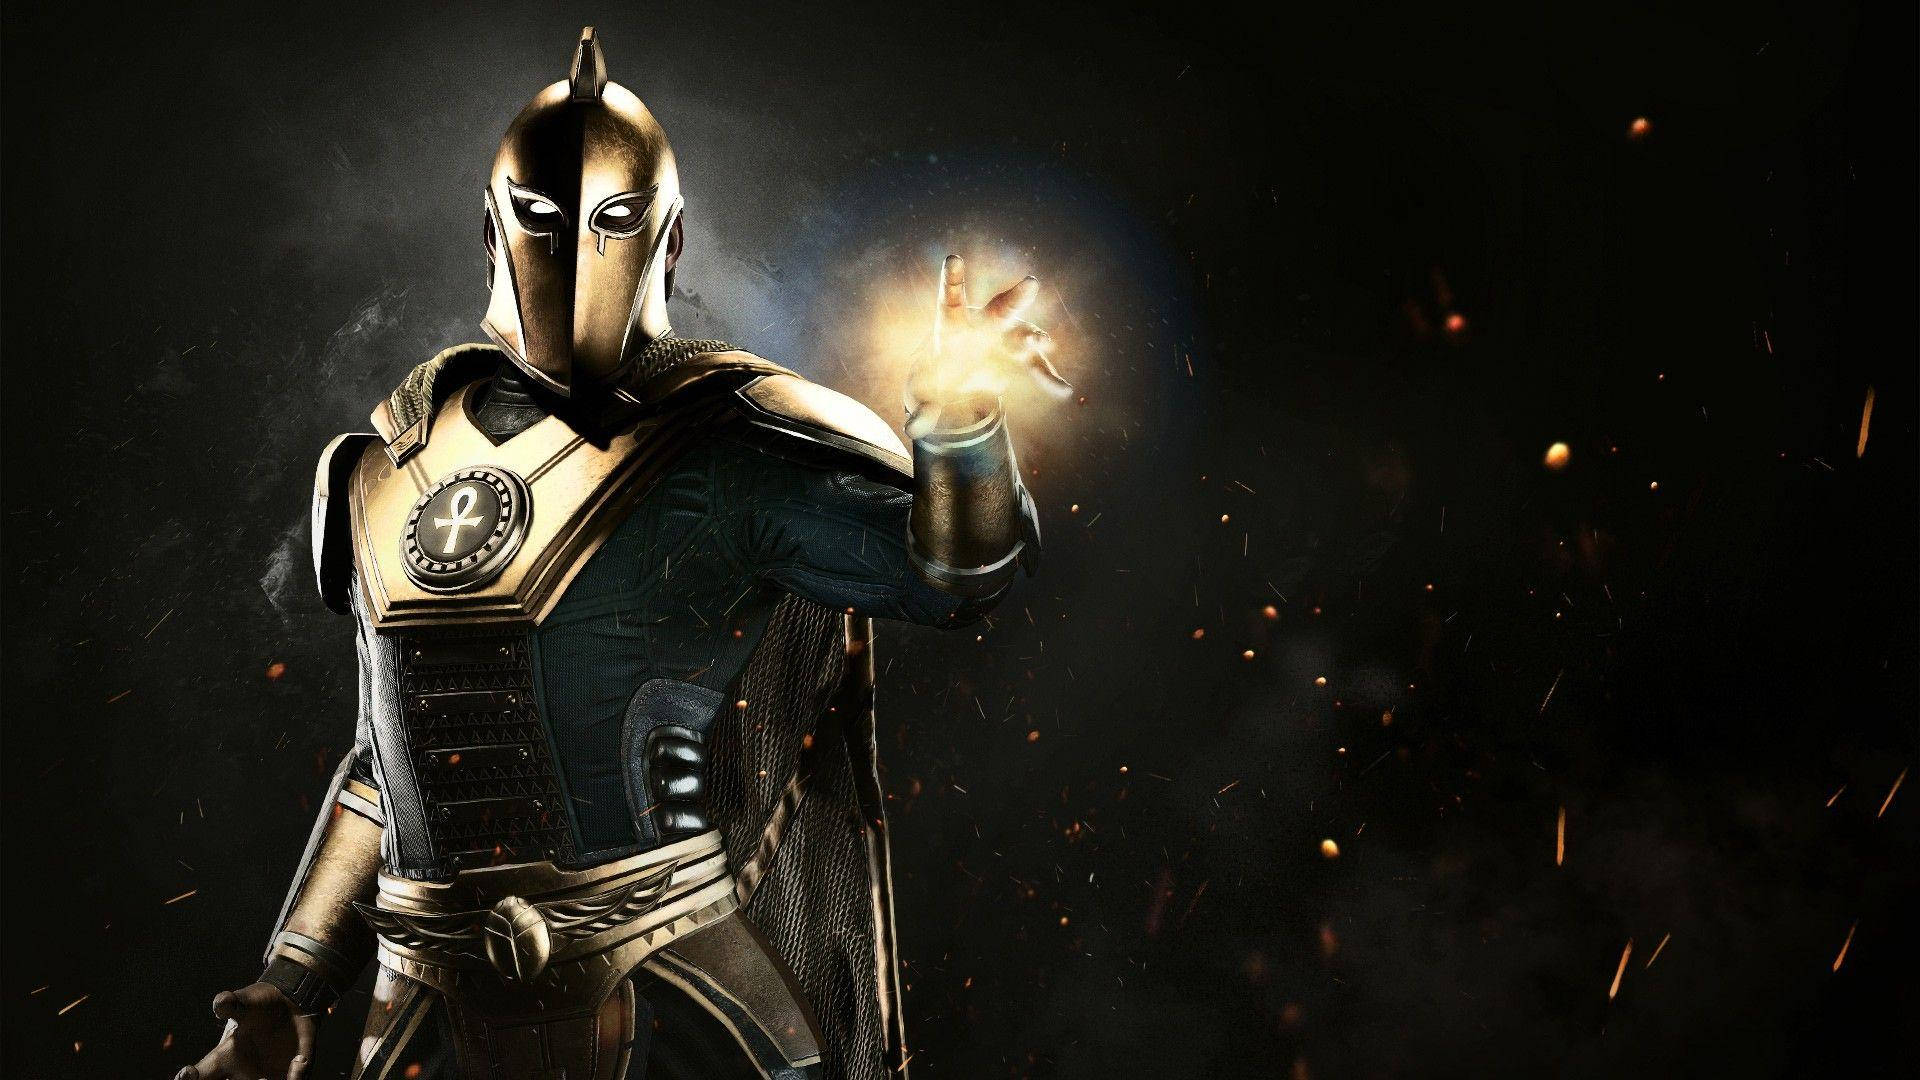 Doctor Fate Of Injustice 2